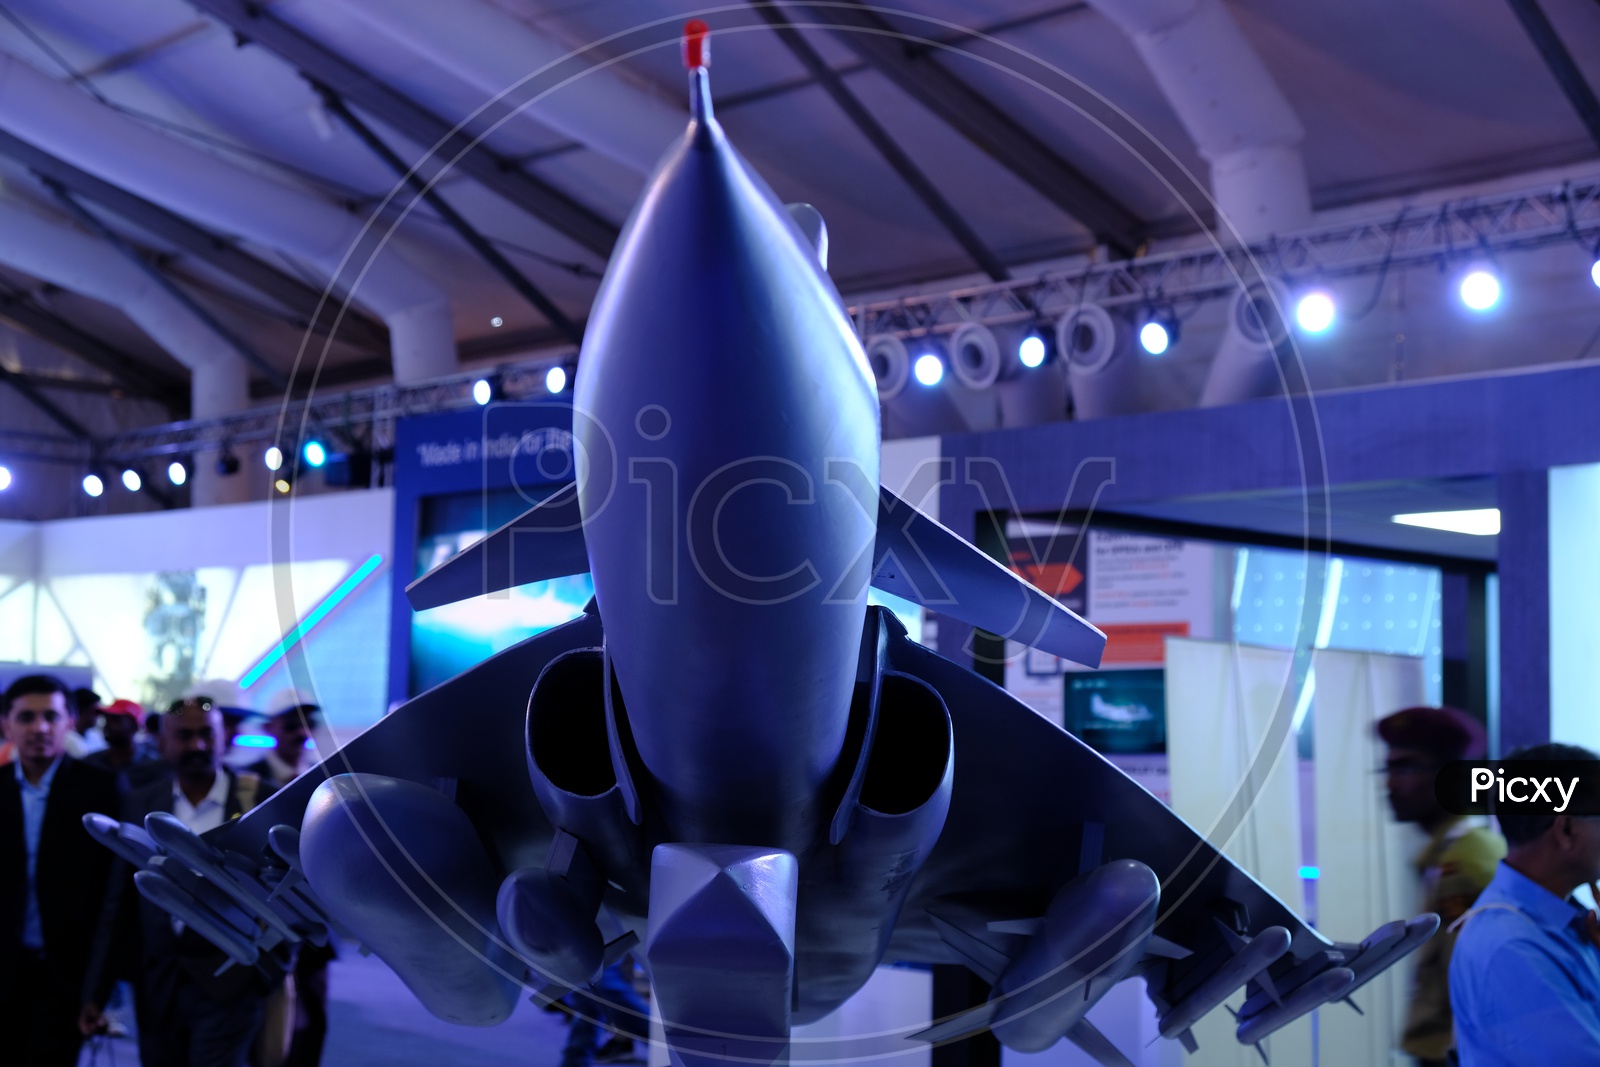 A model of HAL Tejas Mk 2 Medium Weight Fighter (MWF) with Canards showcased at Aero India 2019